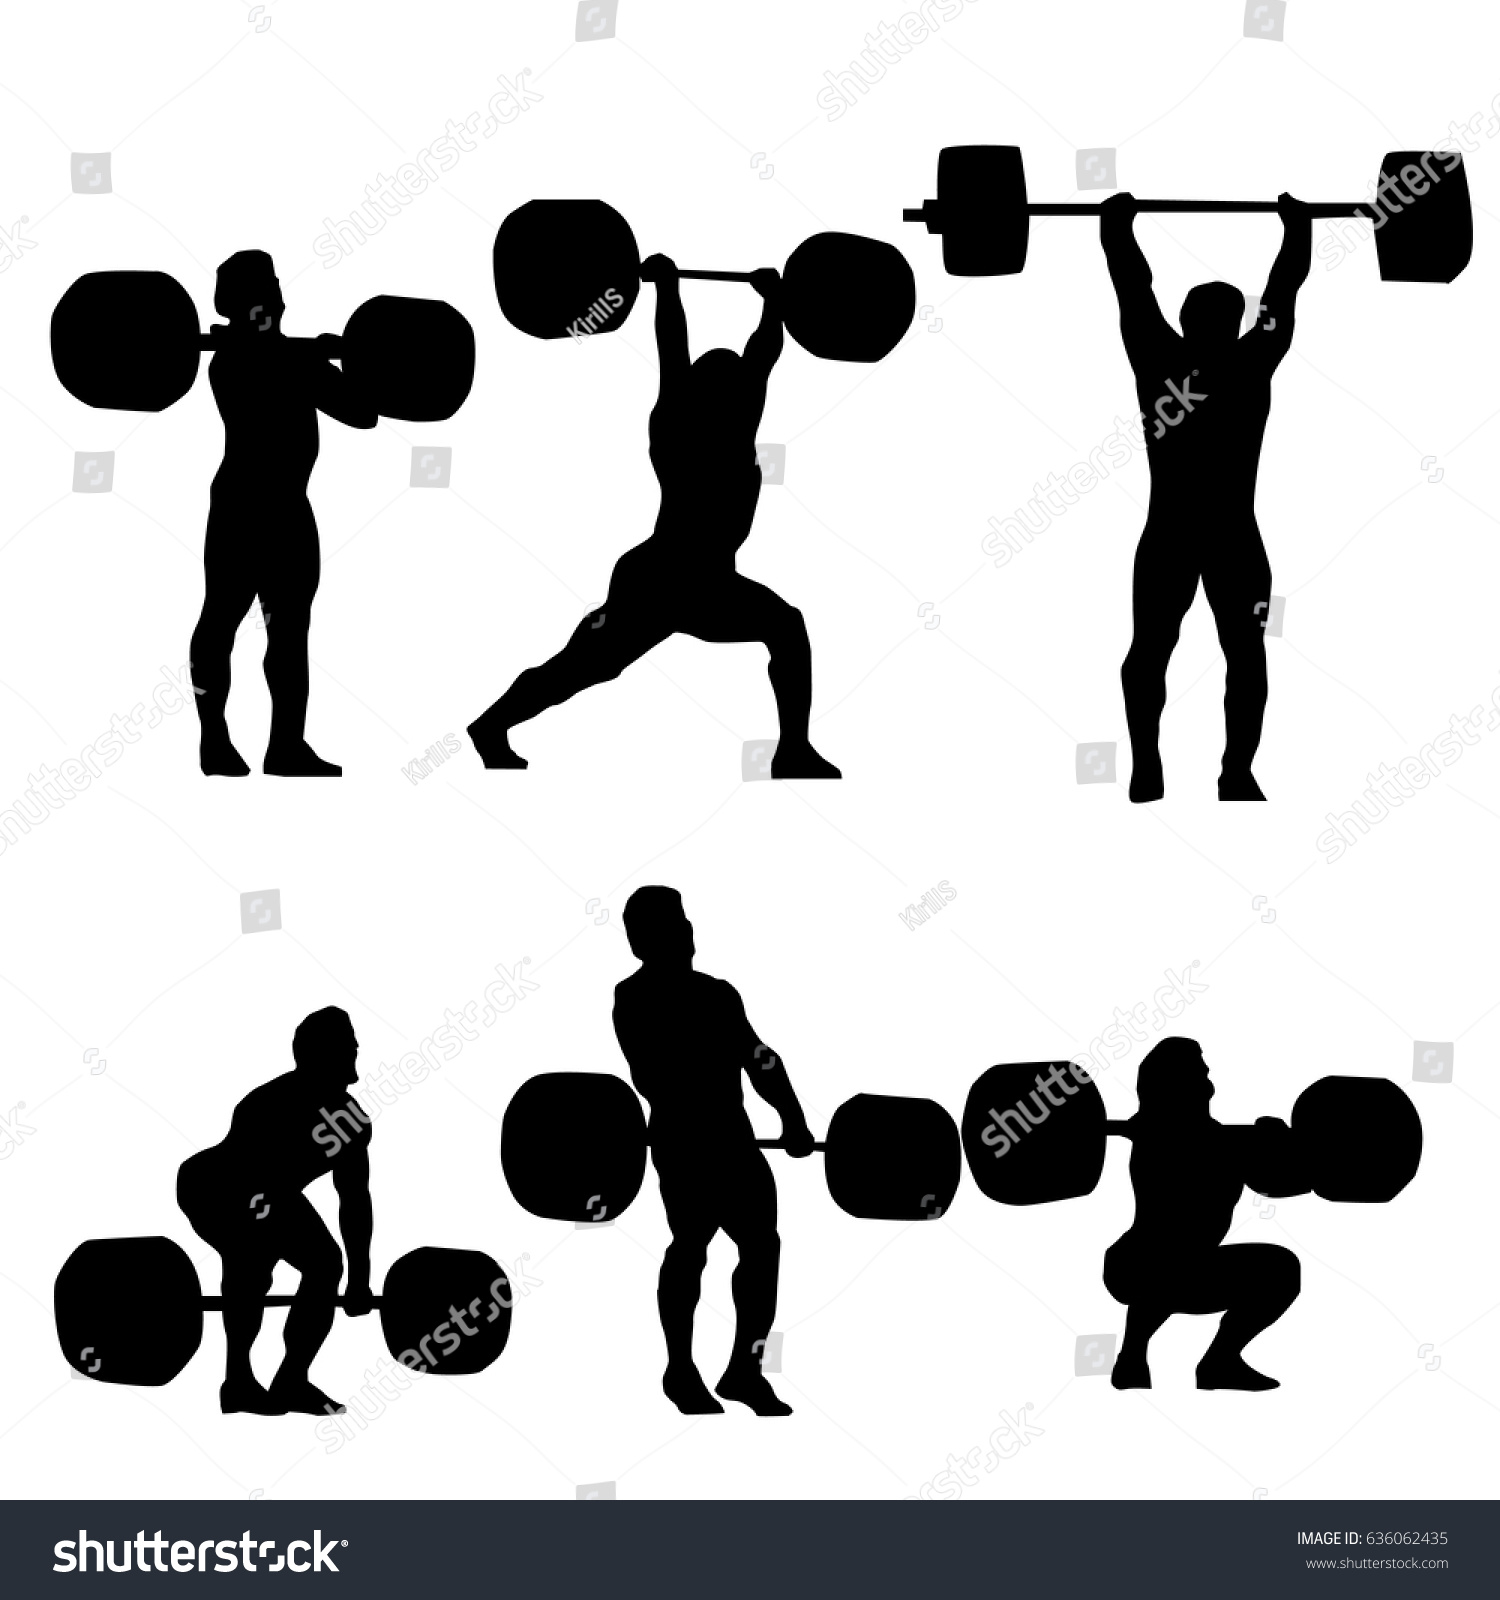 clean and jerk Definition of clean and jerk in English